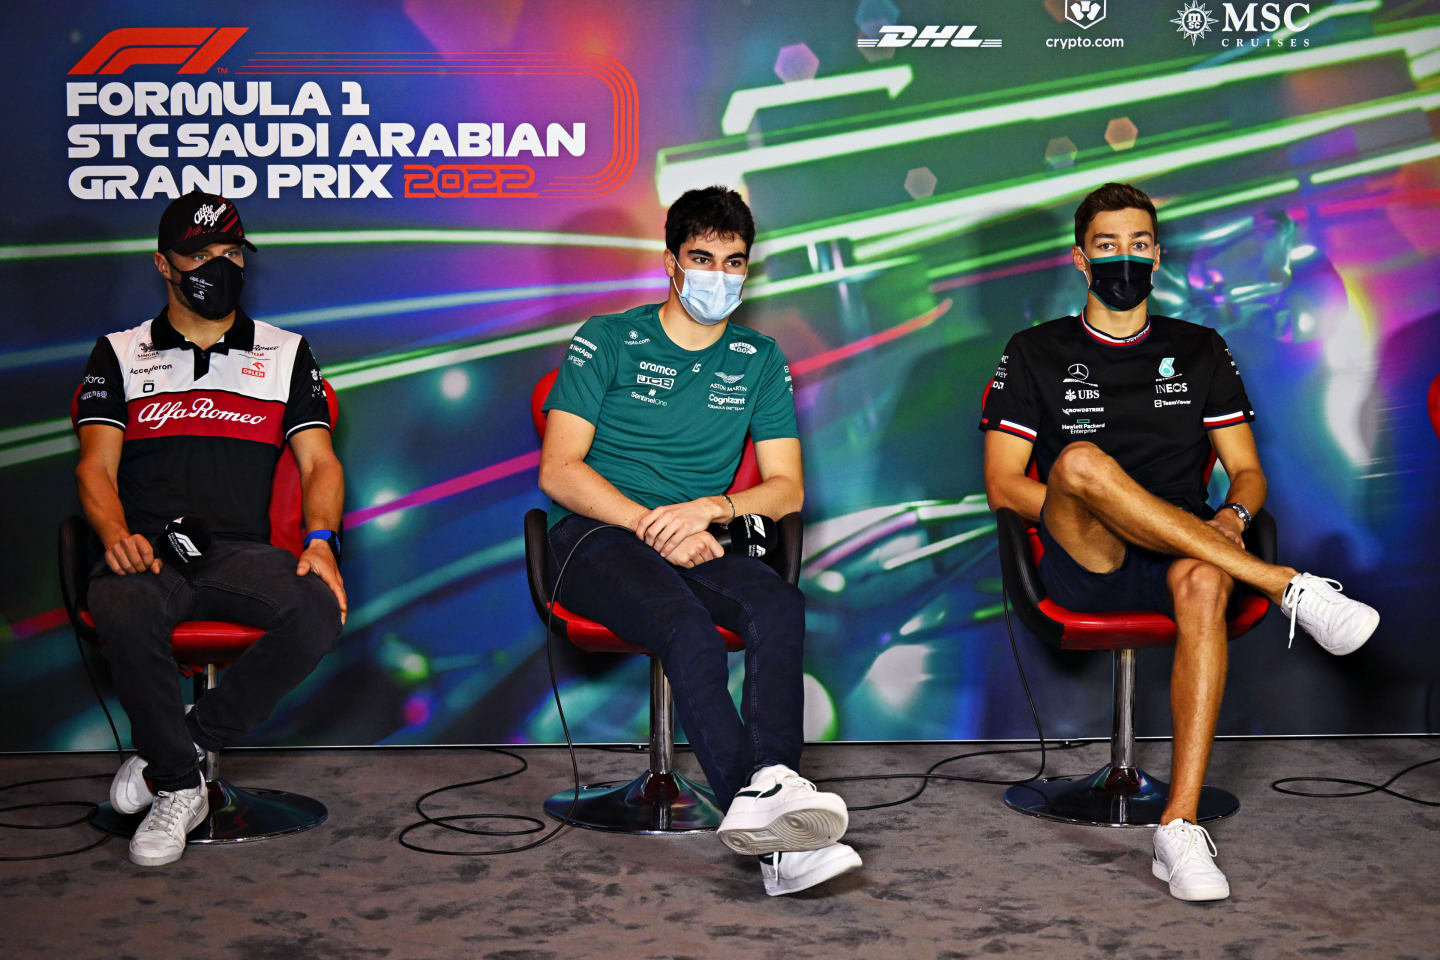 JEDDAH, SAUDI ARABIA - MARCH 25: (L-R) Valtteri Bottas of Finland and Alfa Romeo F1, Lance Stroll of Canada and Aston Martin F1 Team and George Russell of Great Britain and Mercedes attend the Drivers Press Conference before practice ahead of the F1 Grand Prix of Saudi Arabia at the Jeddah Corniche Circuit on March 25, 2022 in Jeddah, Saudi Arabia. (Photo by Clive Mason/Getty Images)